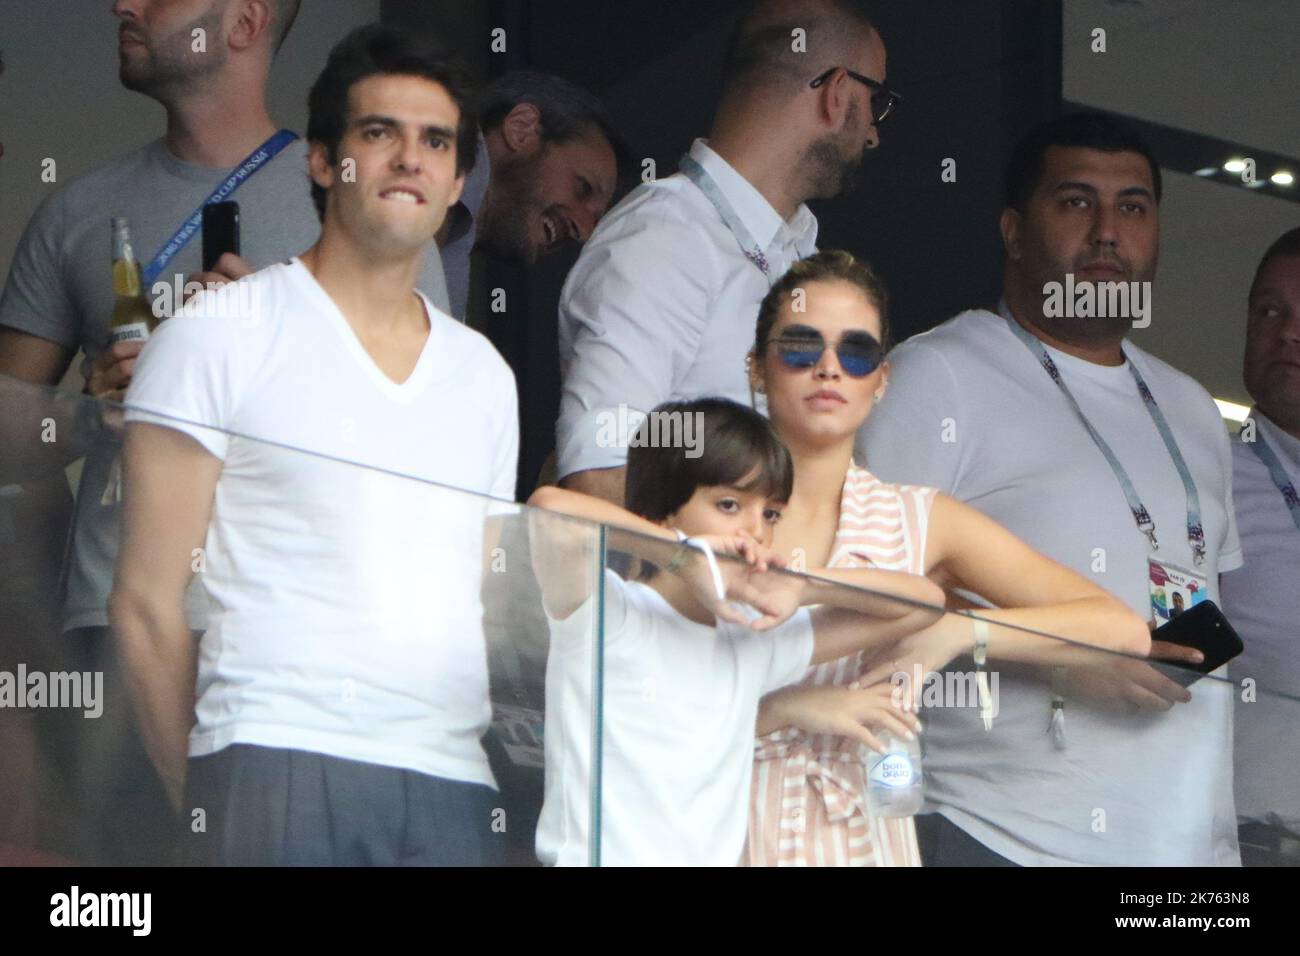 FIFA World Cup Russia 2018, Final Football Match France versus Croatia, France is the new World Champion. France won the World Cup for the second time 4-2 against Croatia. Pictured: Kaka player and his family © Pierre Teyssot / Maxppp Stock Photo